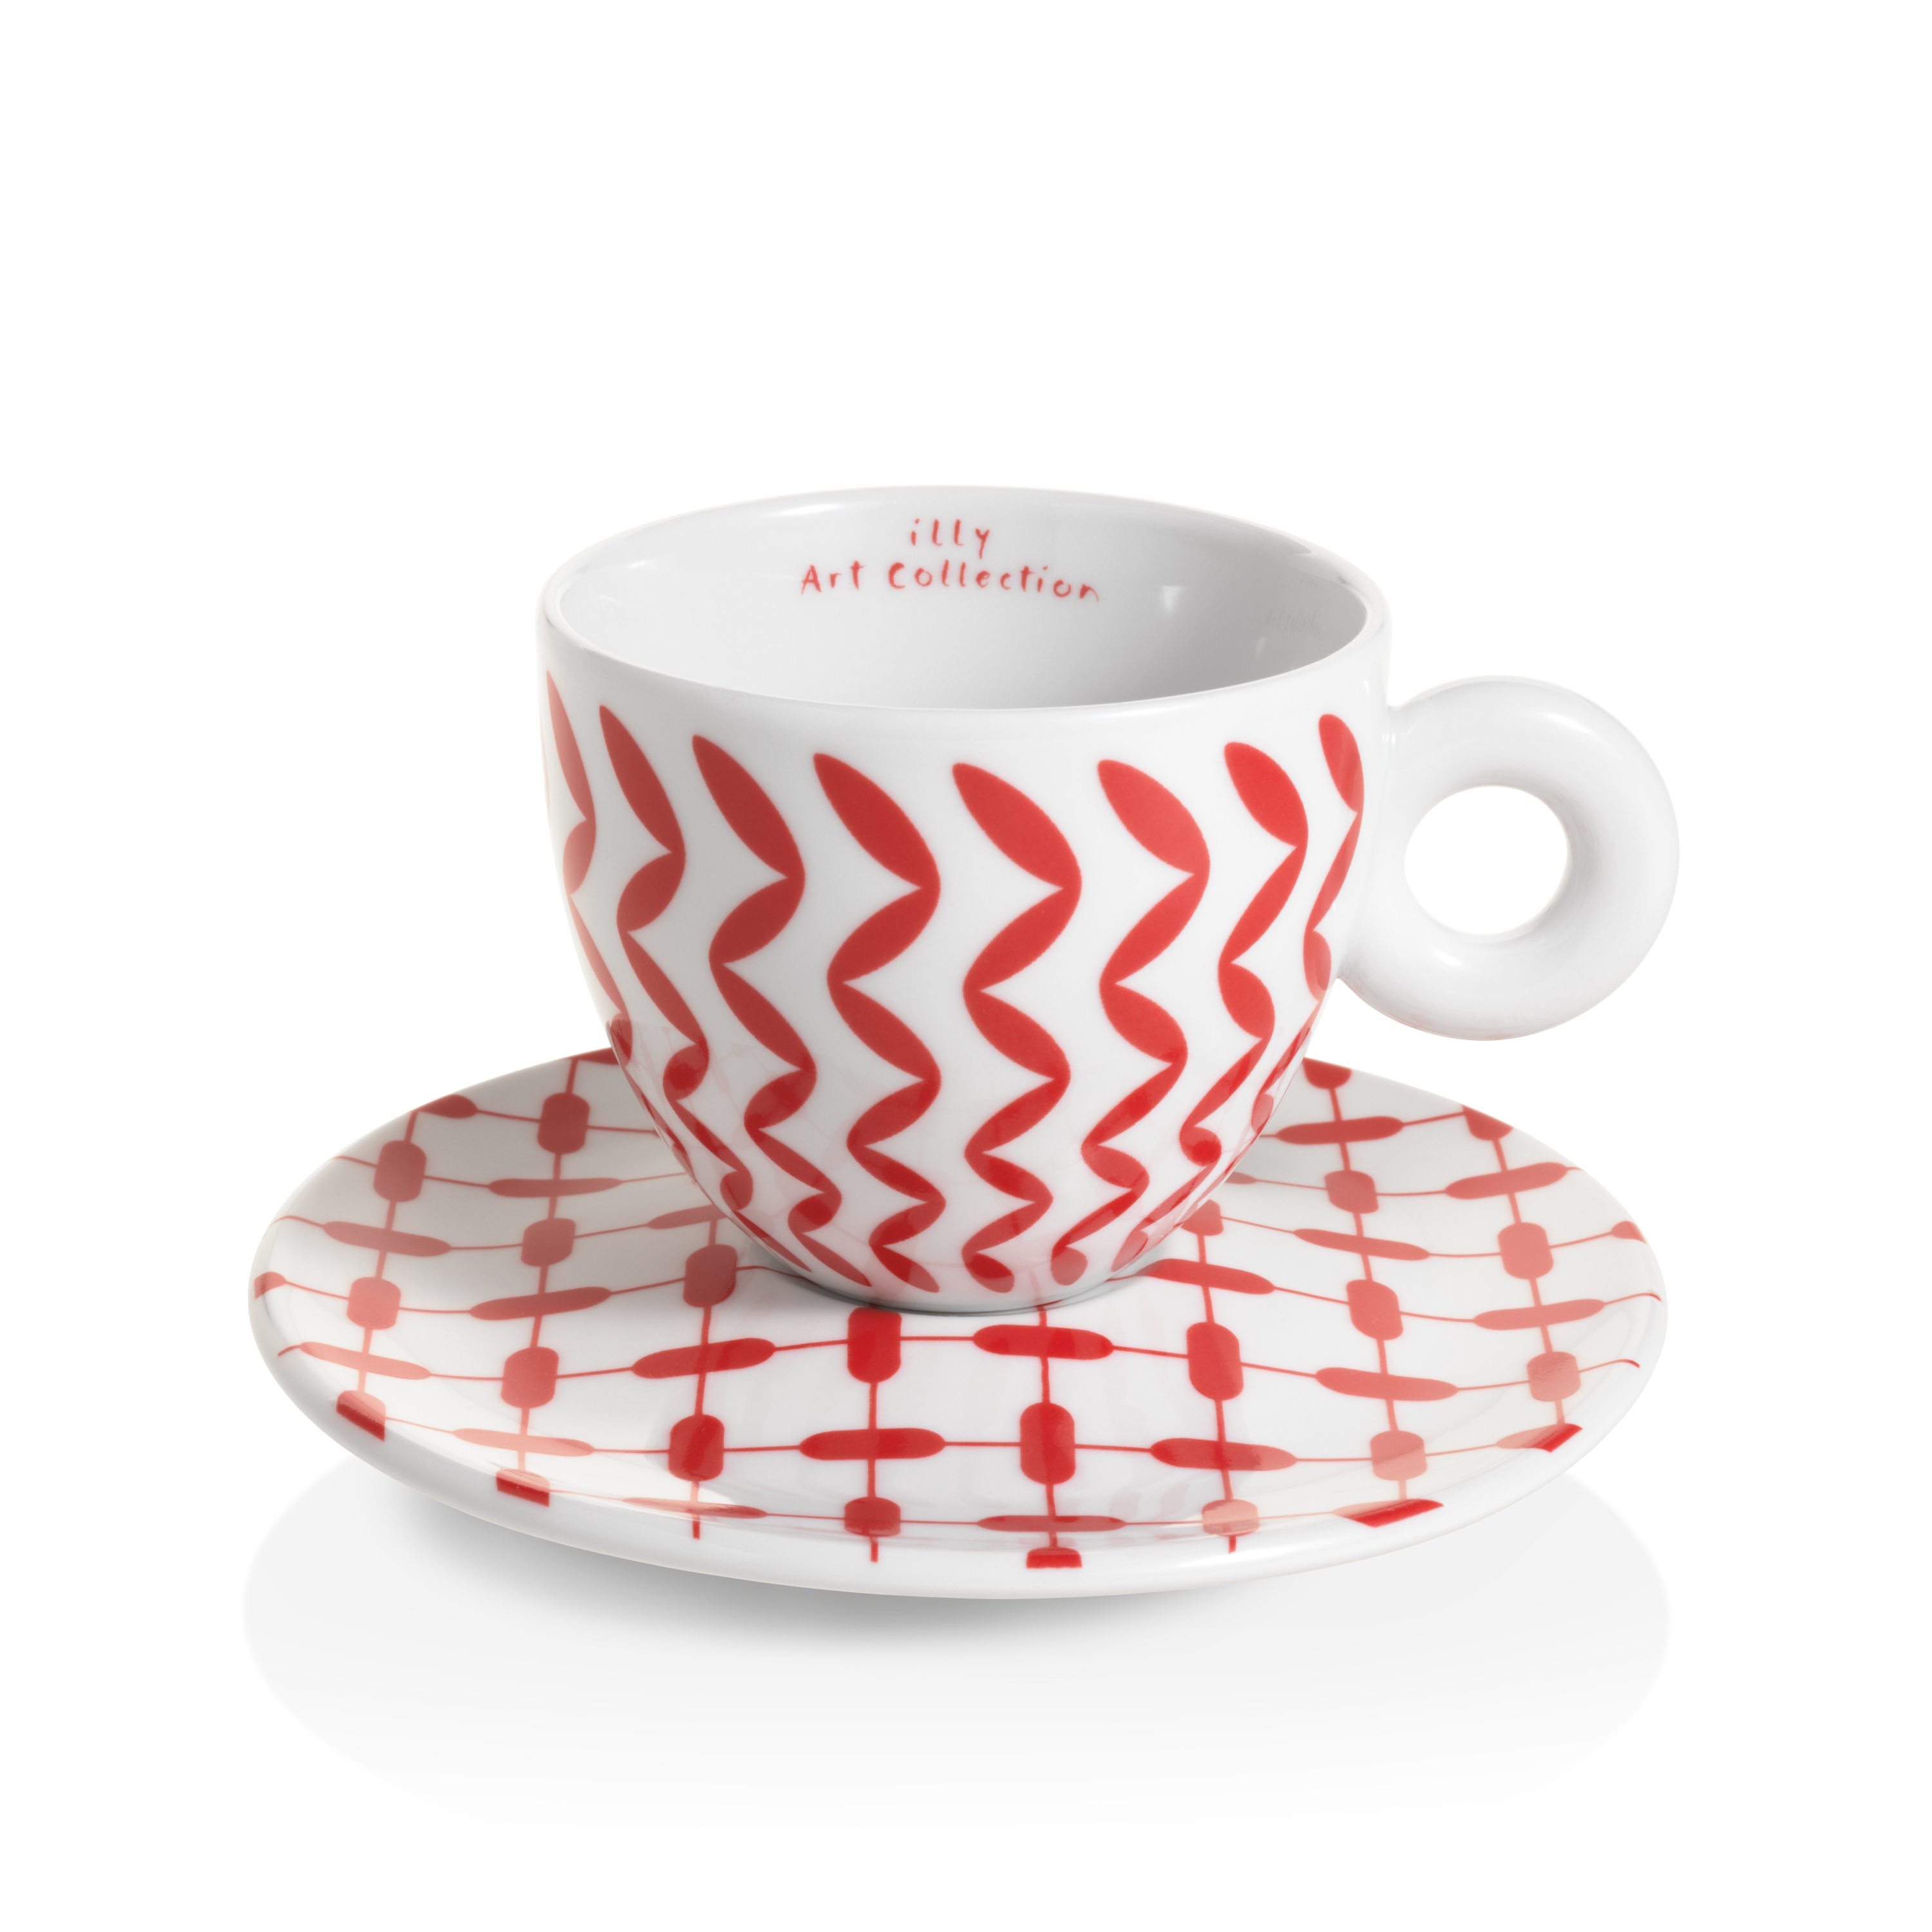 illy Art Collection MONA HATOUM Gift Set 6 Cappuccino Cups, Cups, 02-02-6078